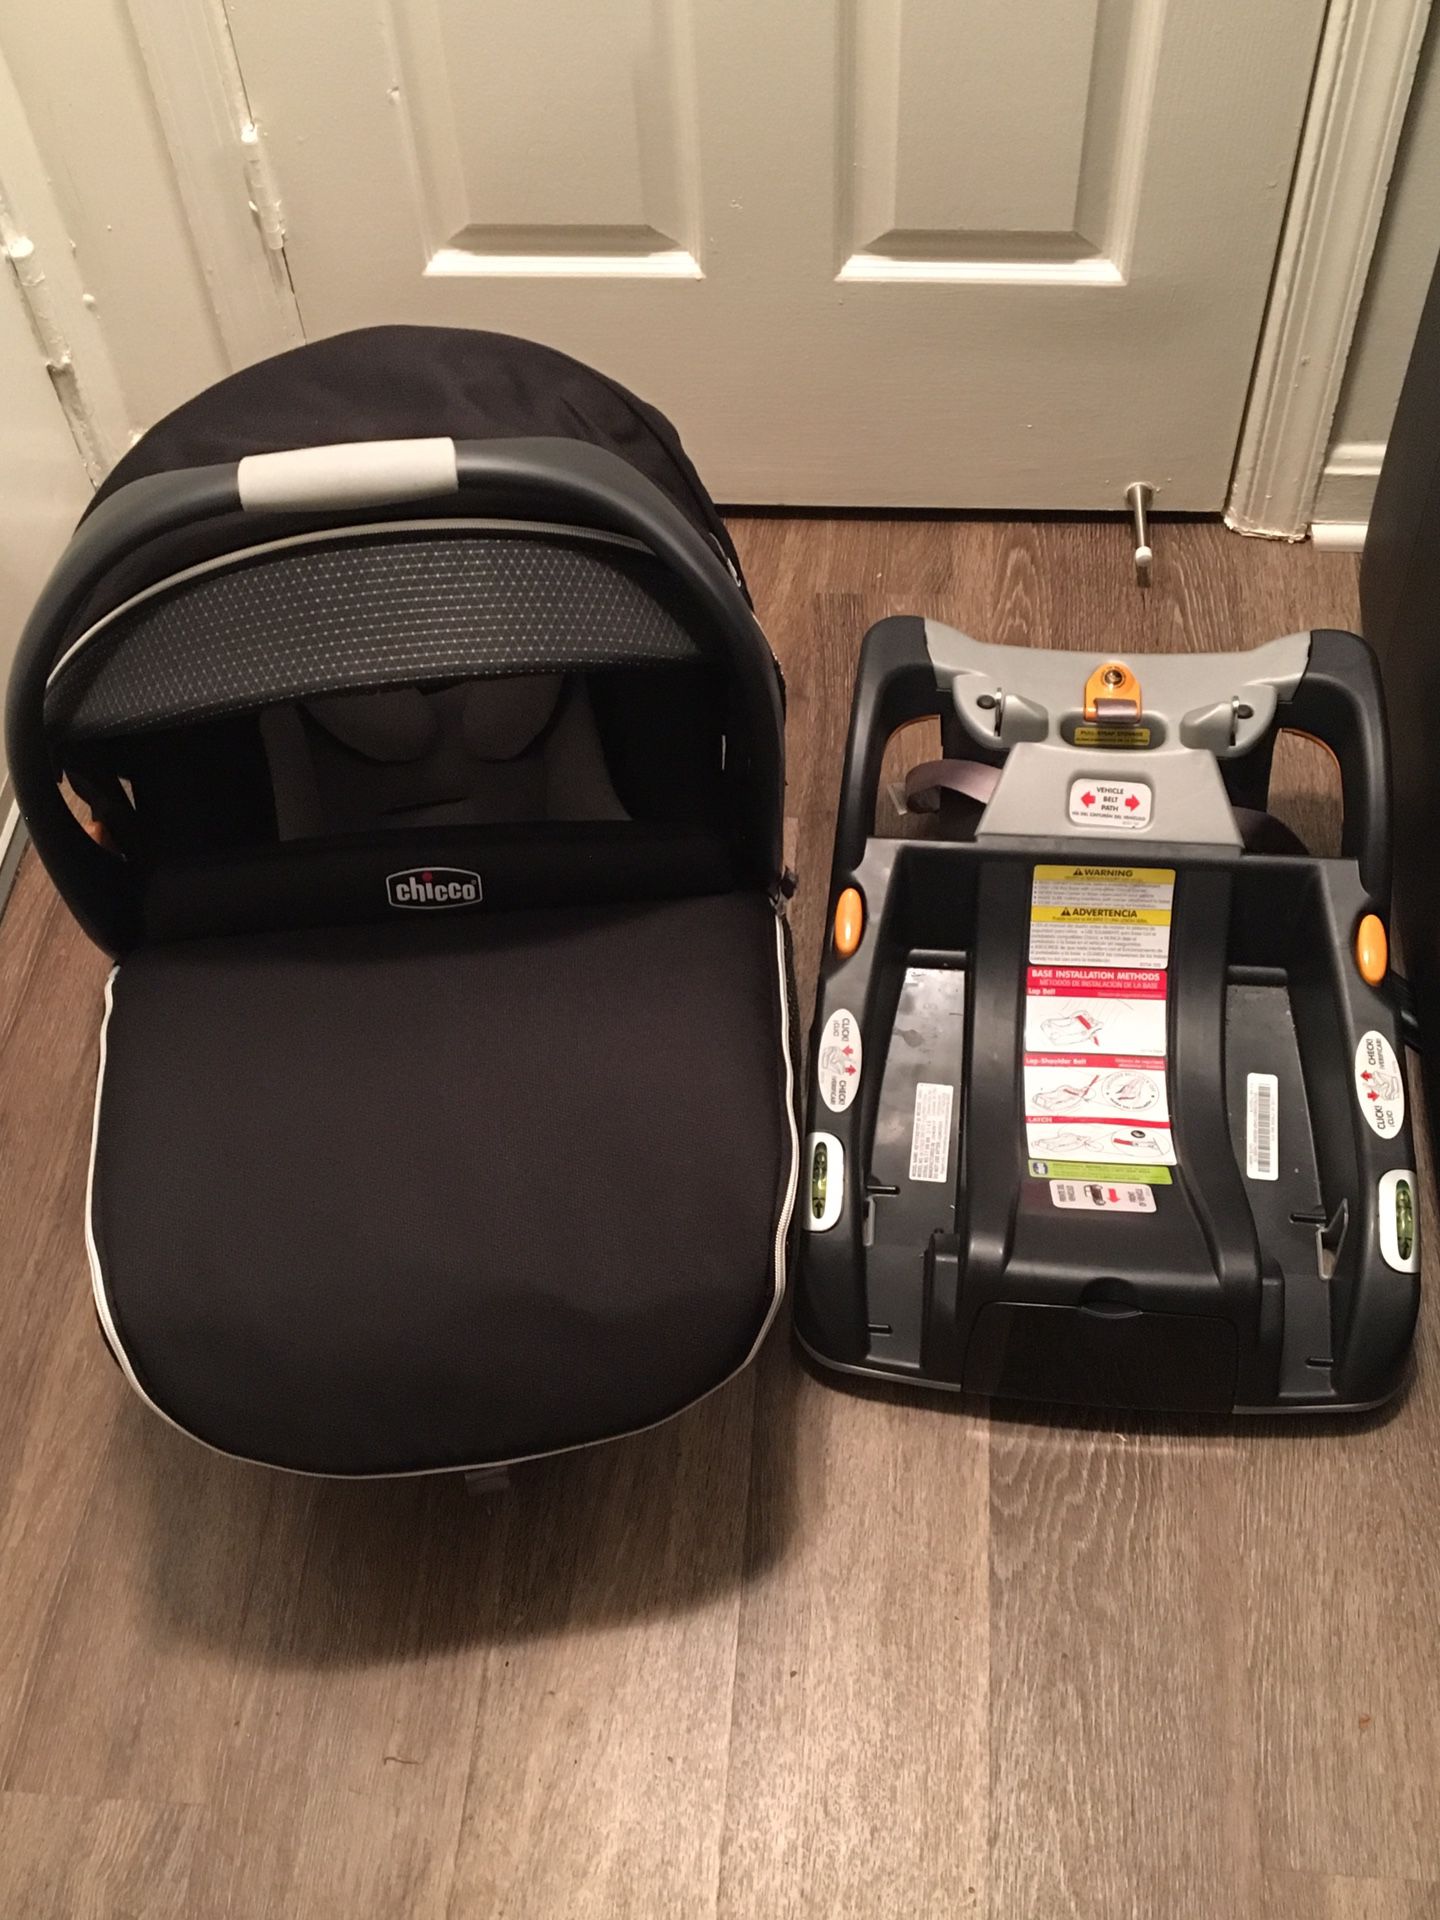 Chicco keyfit 30 zip infant car seat